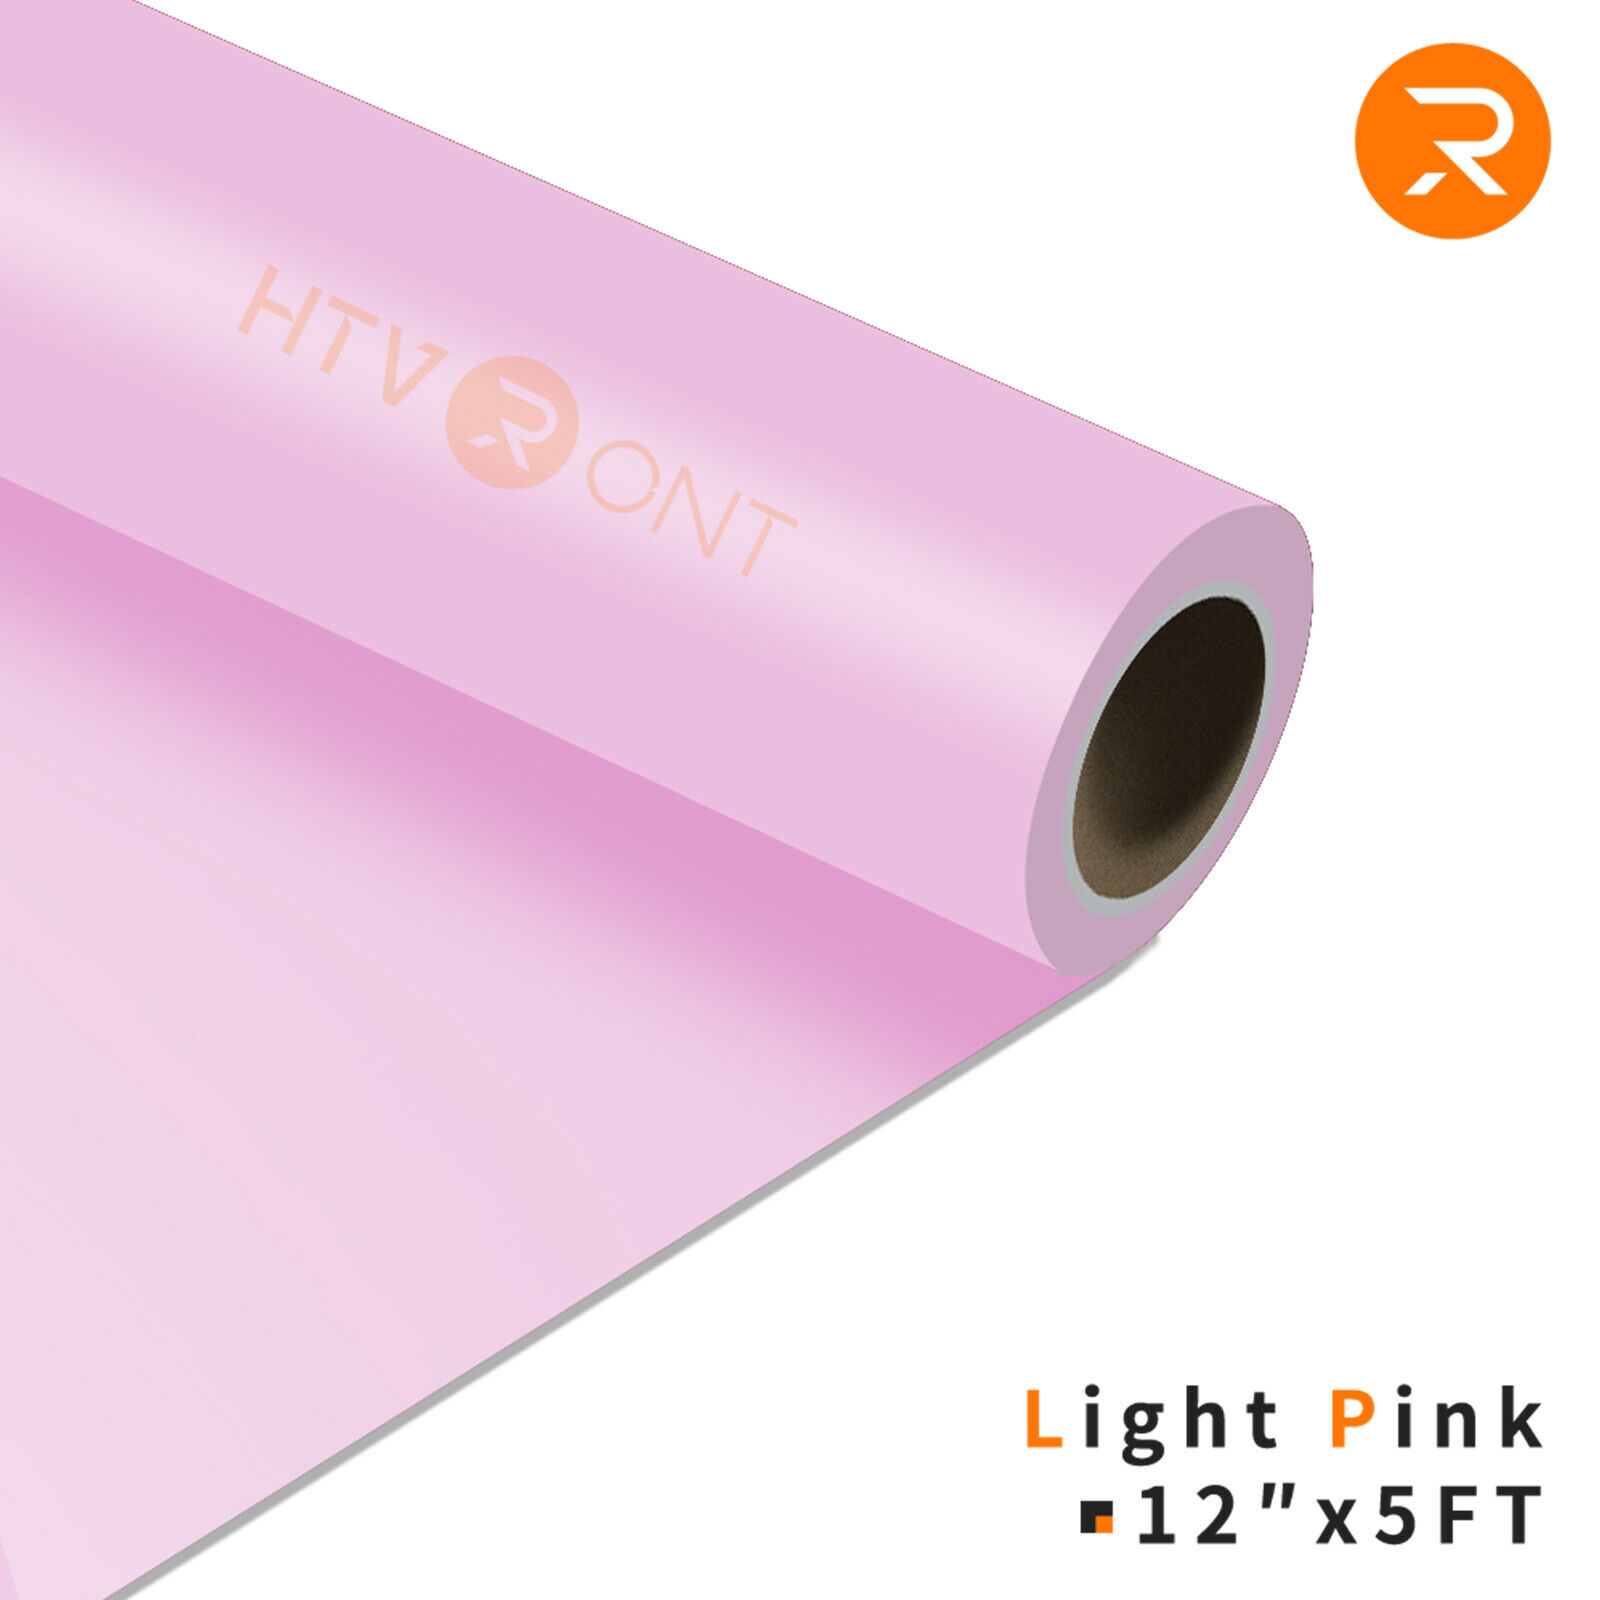 HTVRONT 12 x 5FT Heat Transfer Vinyl Light Pink HTV Rolls for T-Shirts,  Clothing and Textiles, Easy Transfers